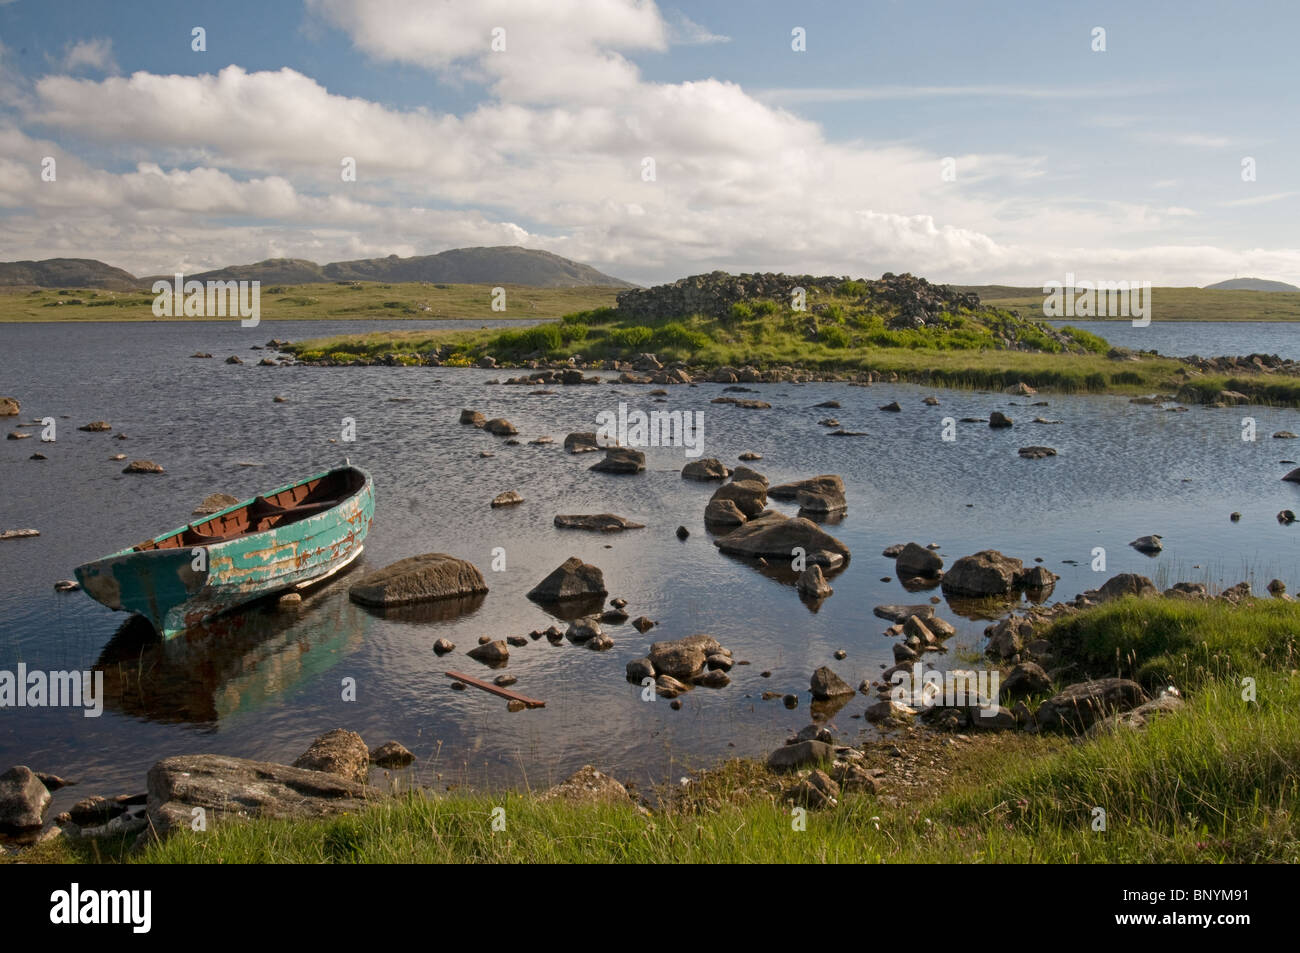 Loch an Duna, Bragar, Isle of Lewis, Outer Hebrides, Western Isles, Highlands and Islands.  SCO 6227 Stock Photo